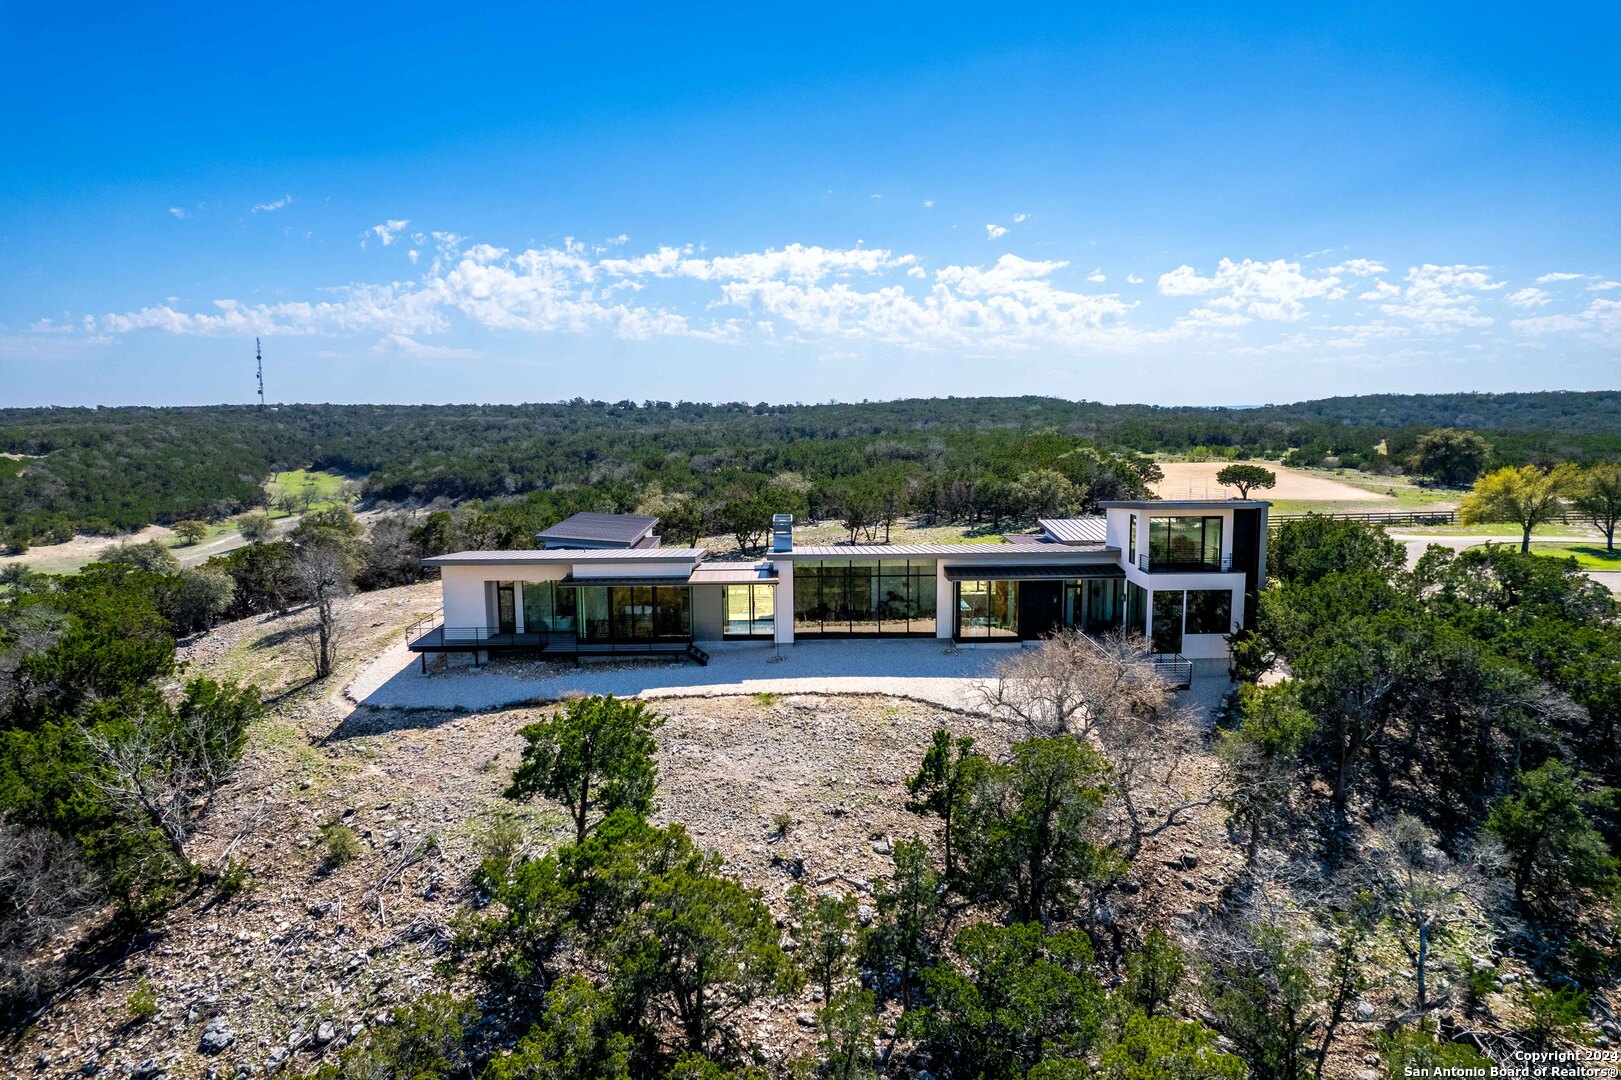 Houses for Sale in the Texas Hill Country - Real Estate Listings